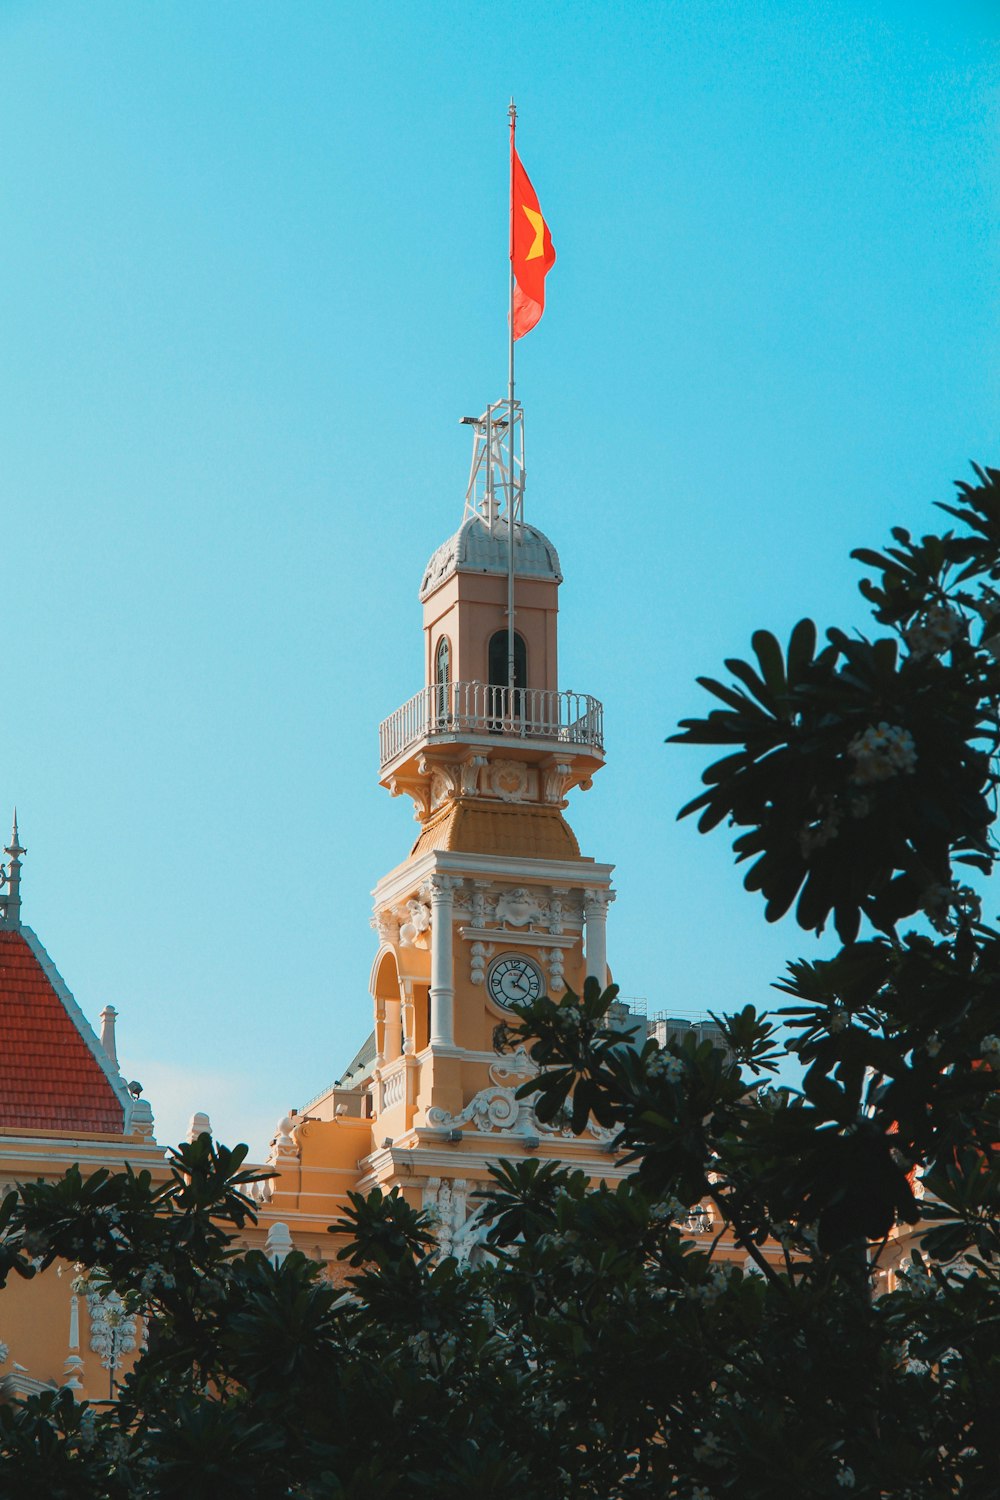 a clock tower with a flag on top of it